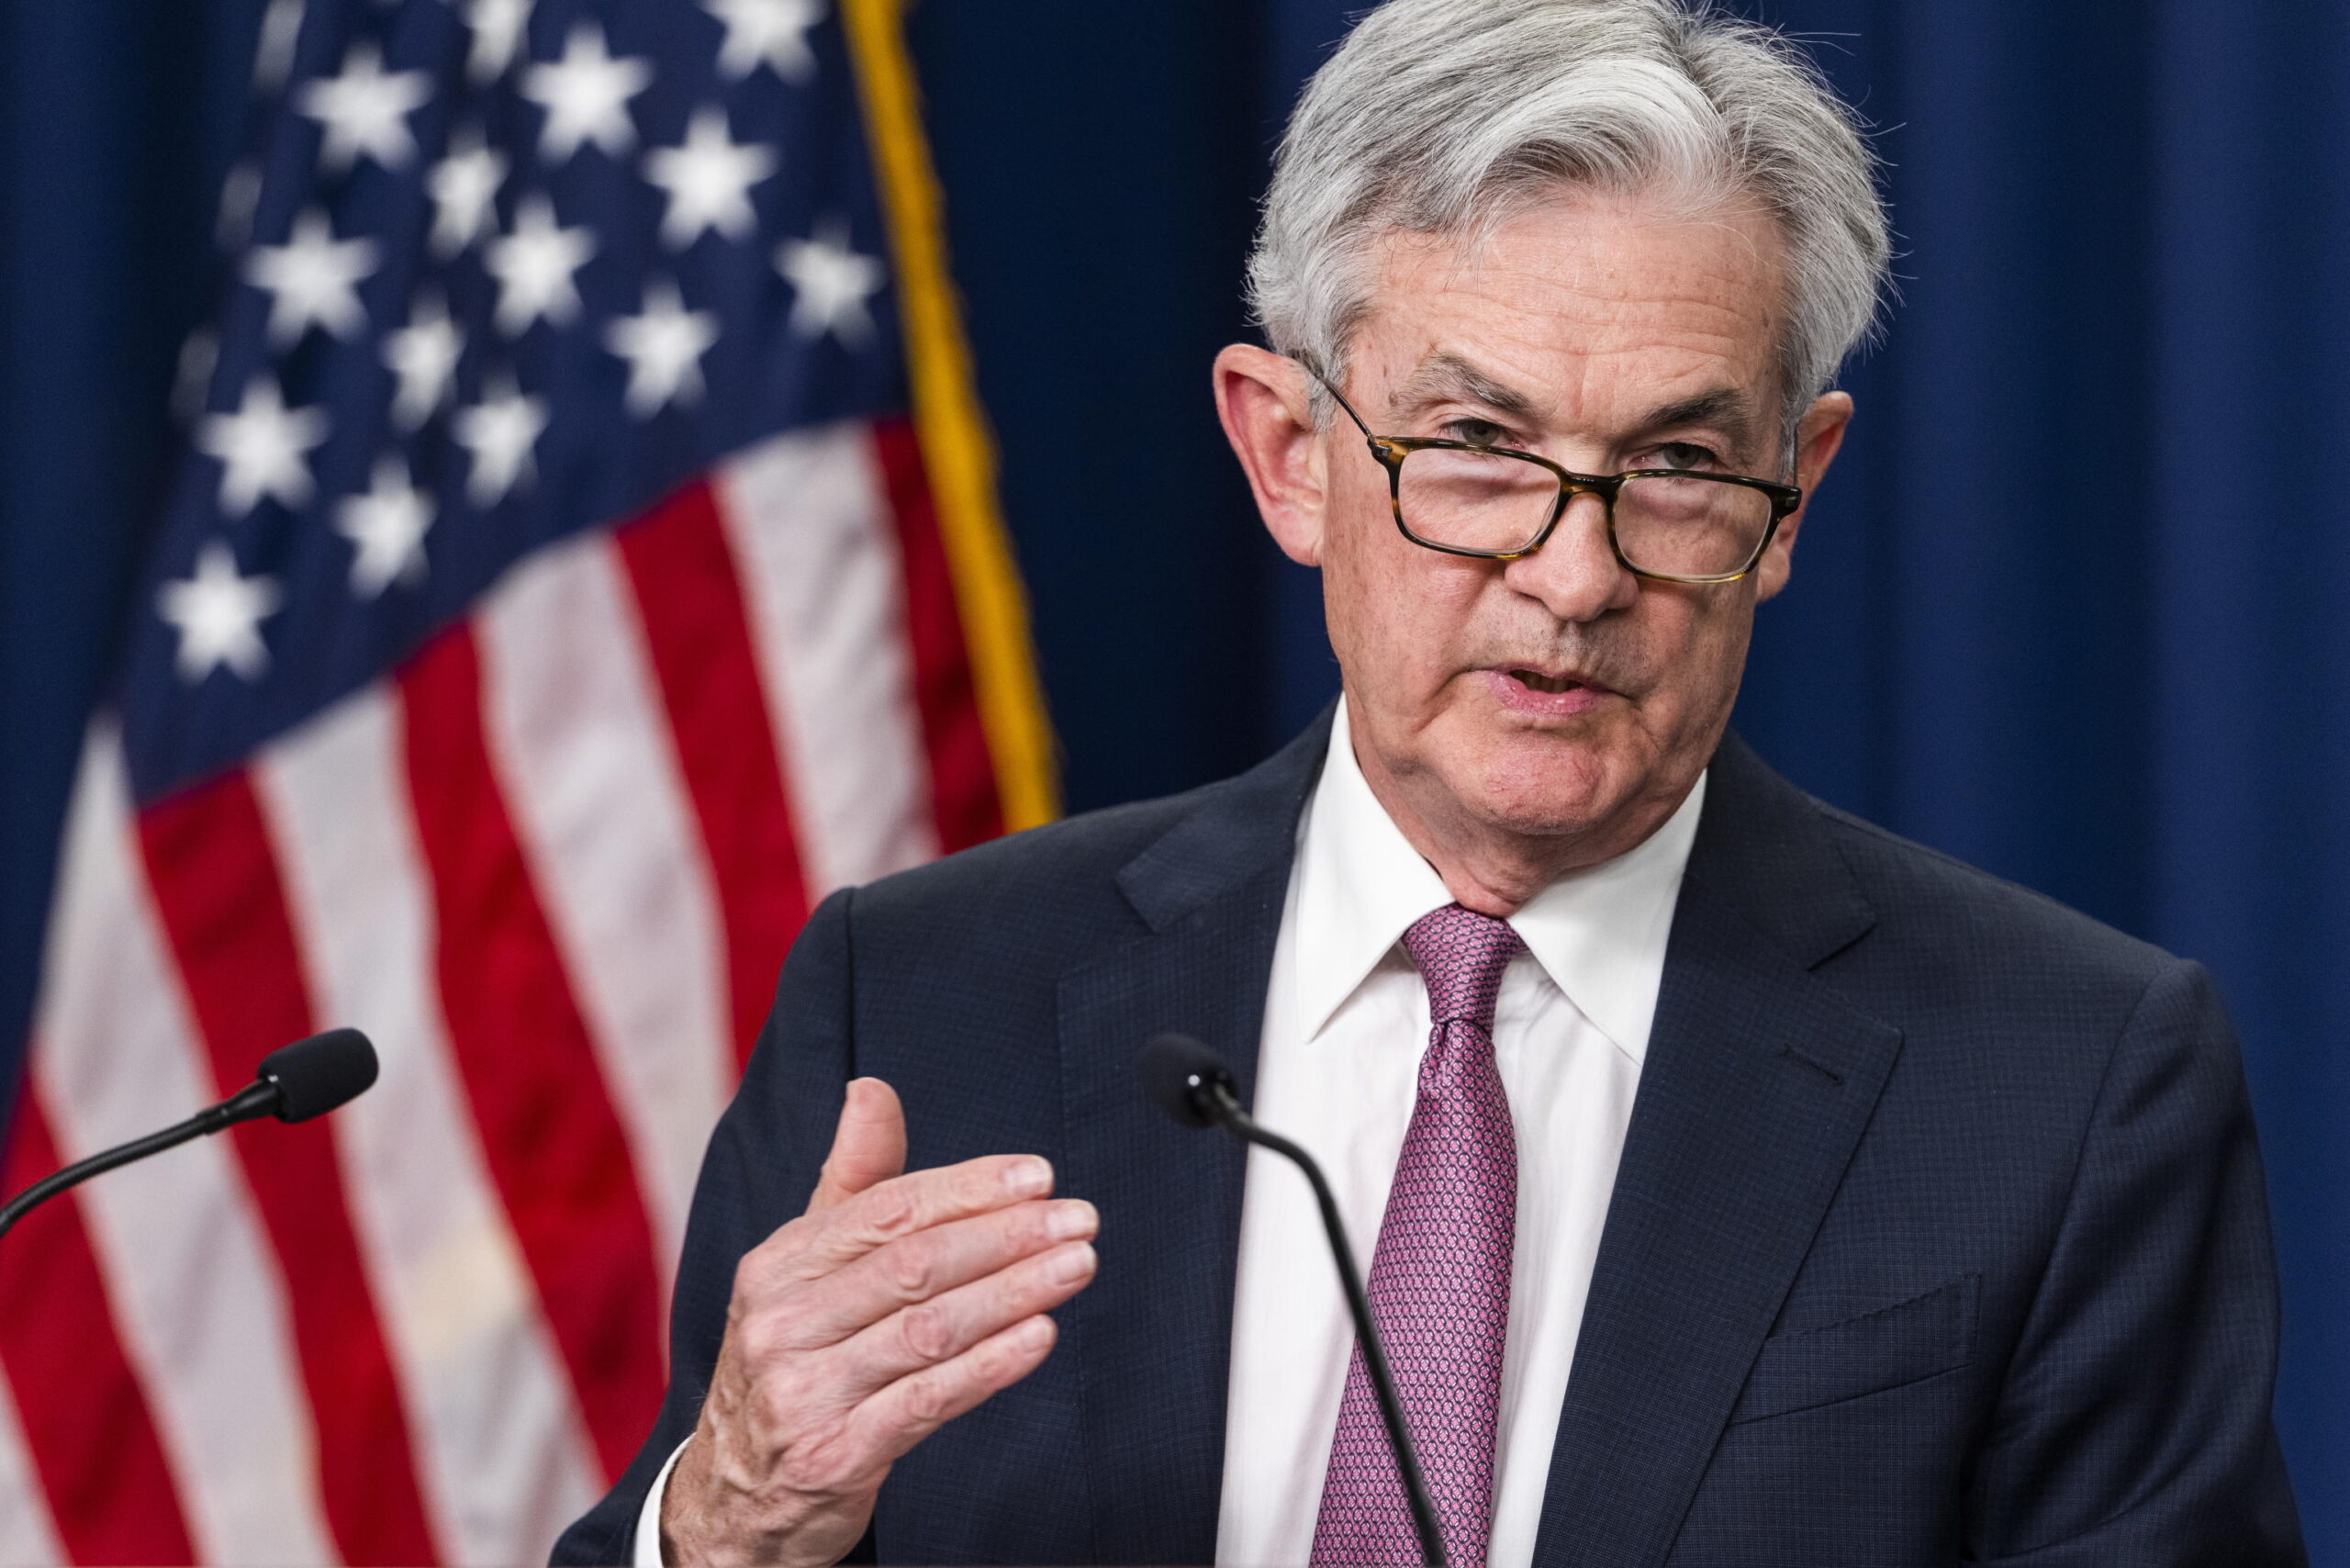 Federal Reserve Board Chairman Jerome Powell holds a news conference after the Fed agreed to raise interest rates by half a percentage point at the William McChesney Martin Jr. Building  in Washington, DC, USA, 04 May 2022. It is the biggest interest rate hike in 20 years.  ANSA/JIM LO SCALZO